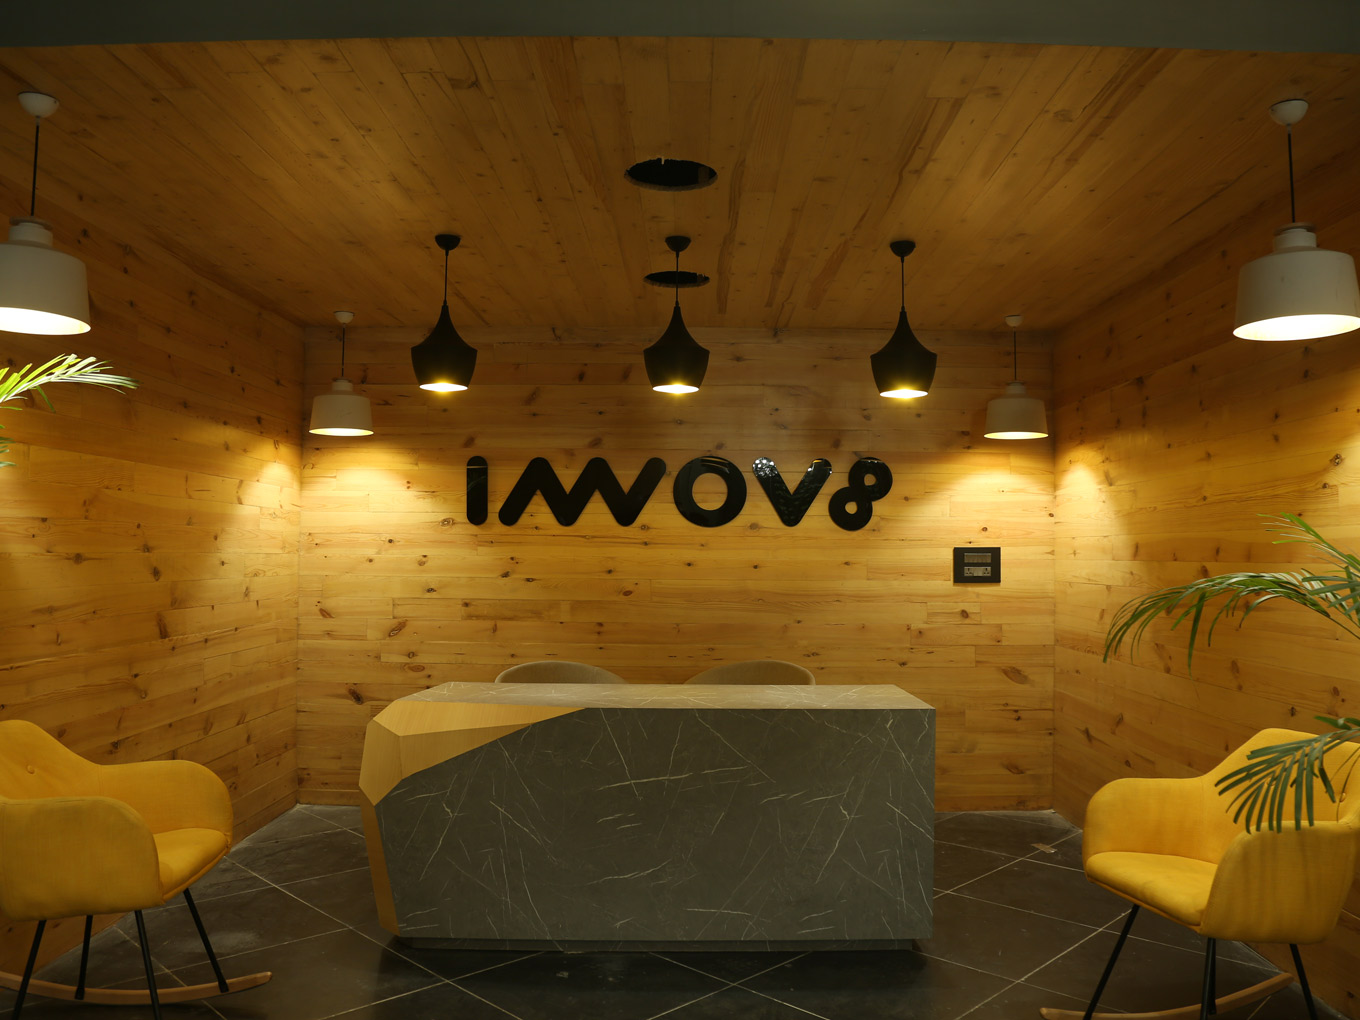 Innov8: Growing At An Enviable Speed With Simplicity At Its Heart